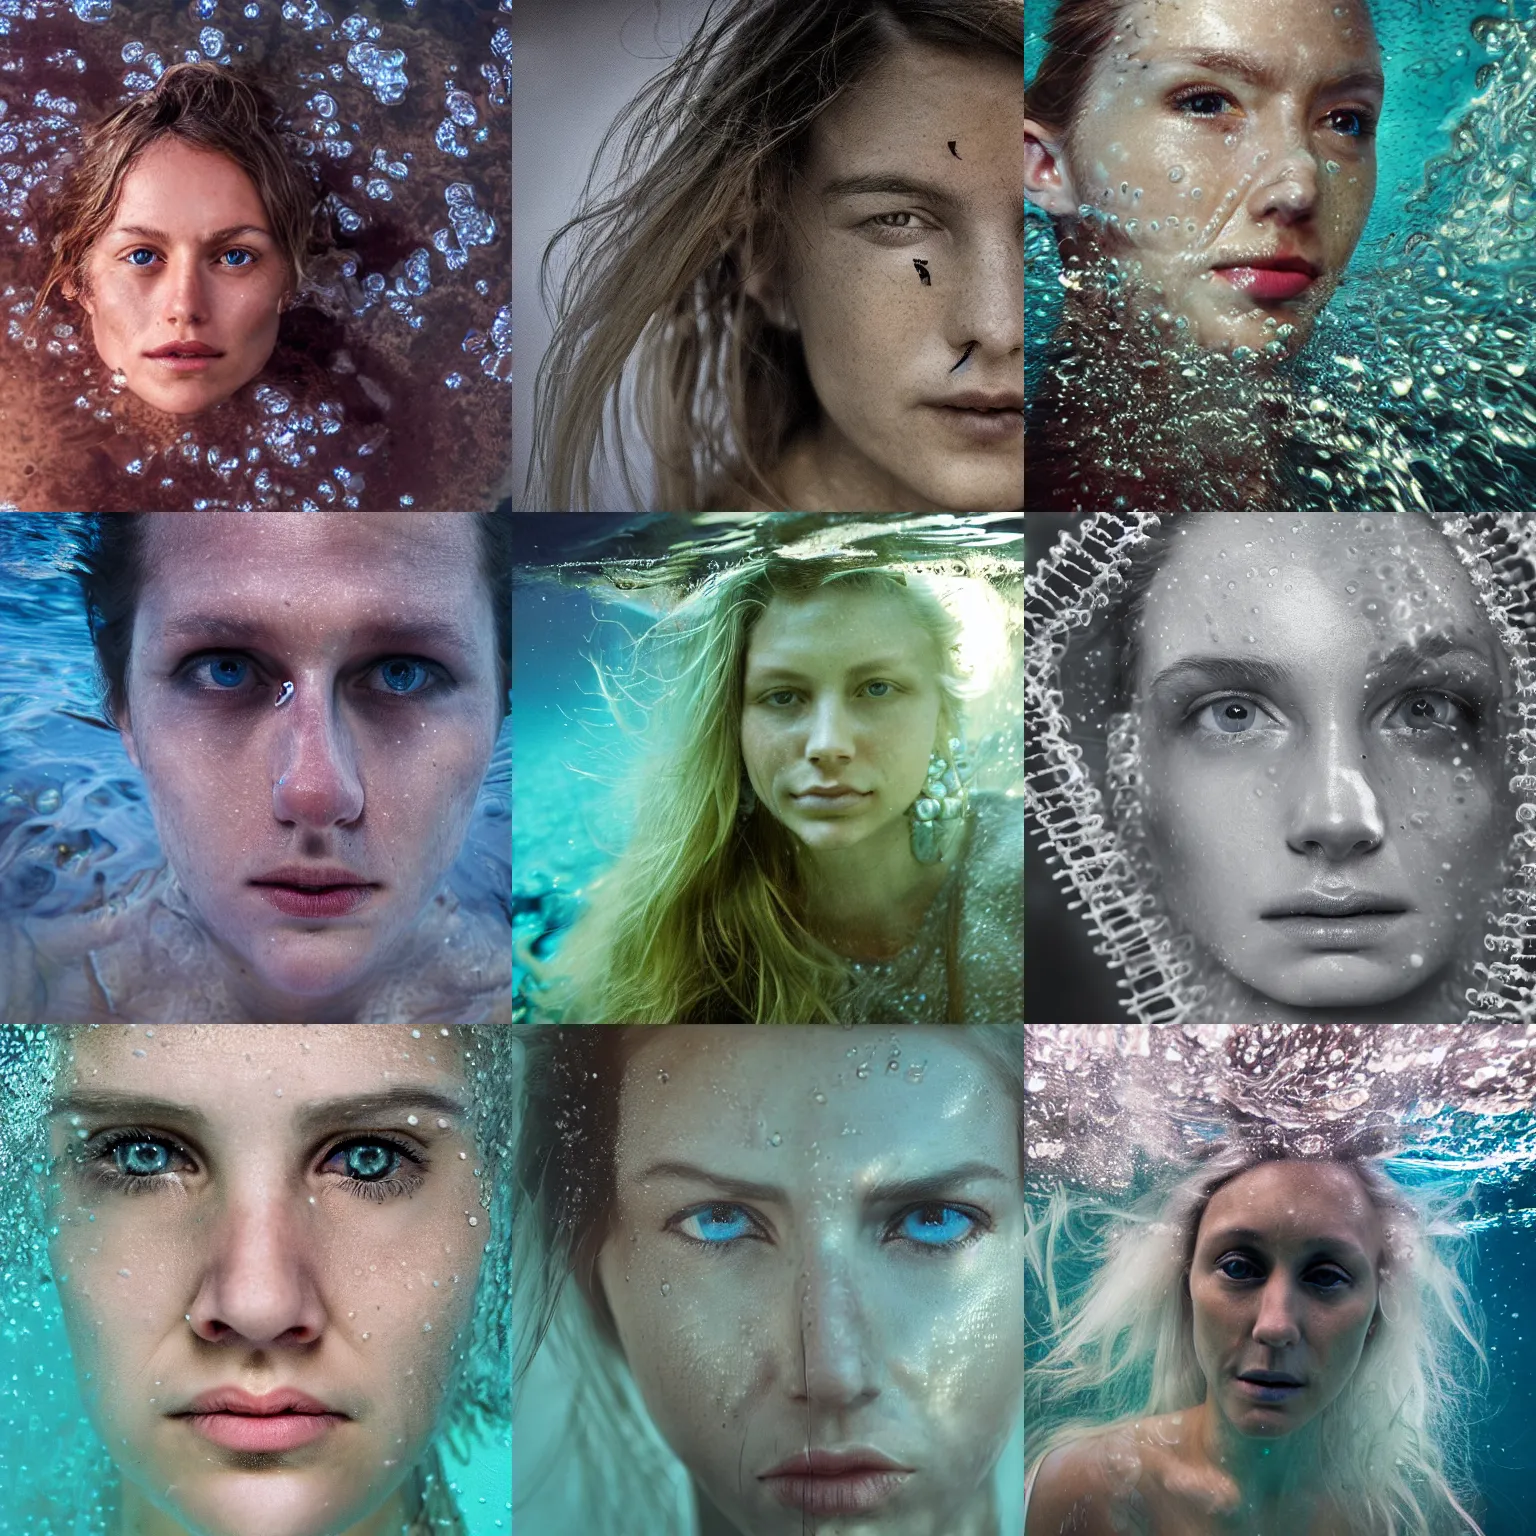 Prompt: beautiful extreme closeup portrait photo in style of frontiers in human near death molecular science magazine underwater britt marling edition, highly detailed, focus on face, soft lighting,